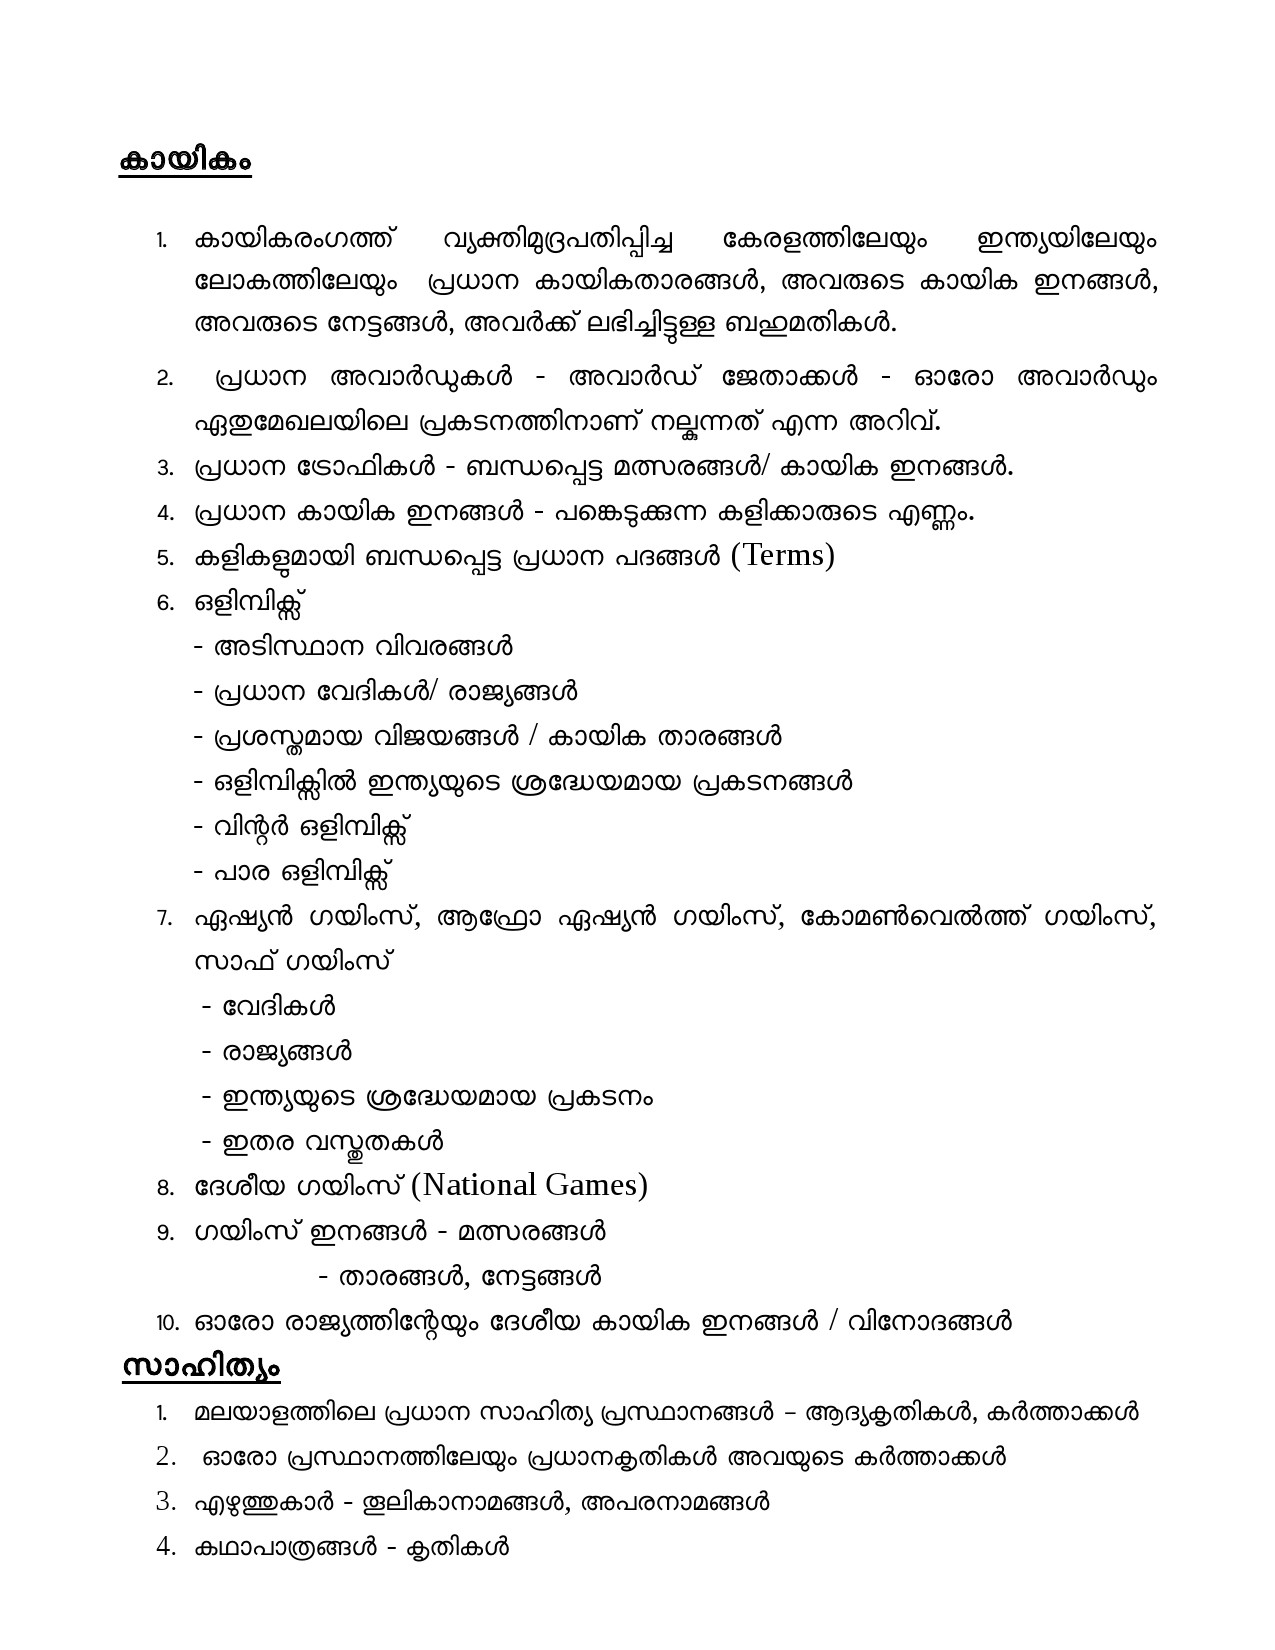 Detailed Syllabus for Common Preliminary Examination for Field Officer - Notification Image 5